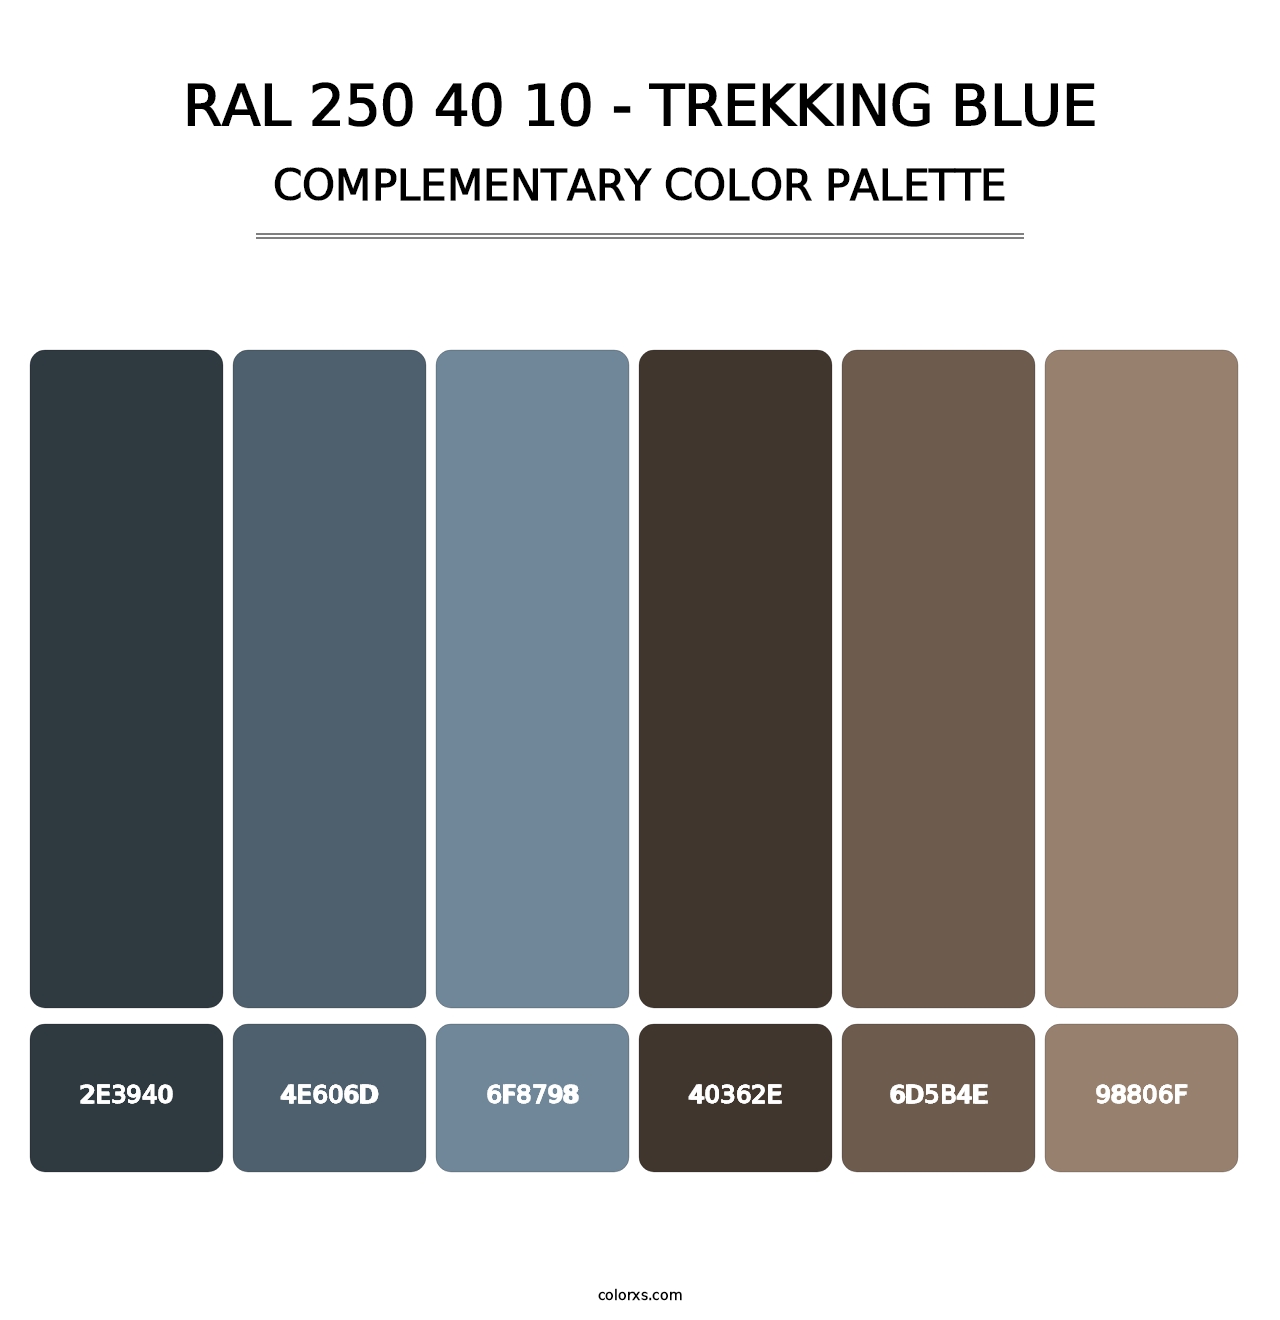 RAL 250 40 10 - Trekking Blue - Complementary Color Palette